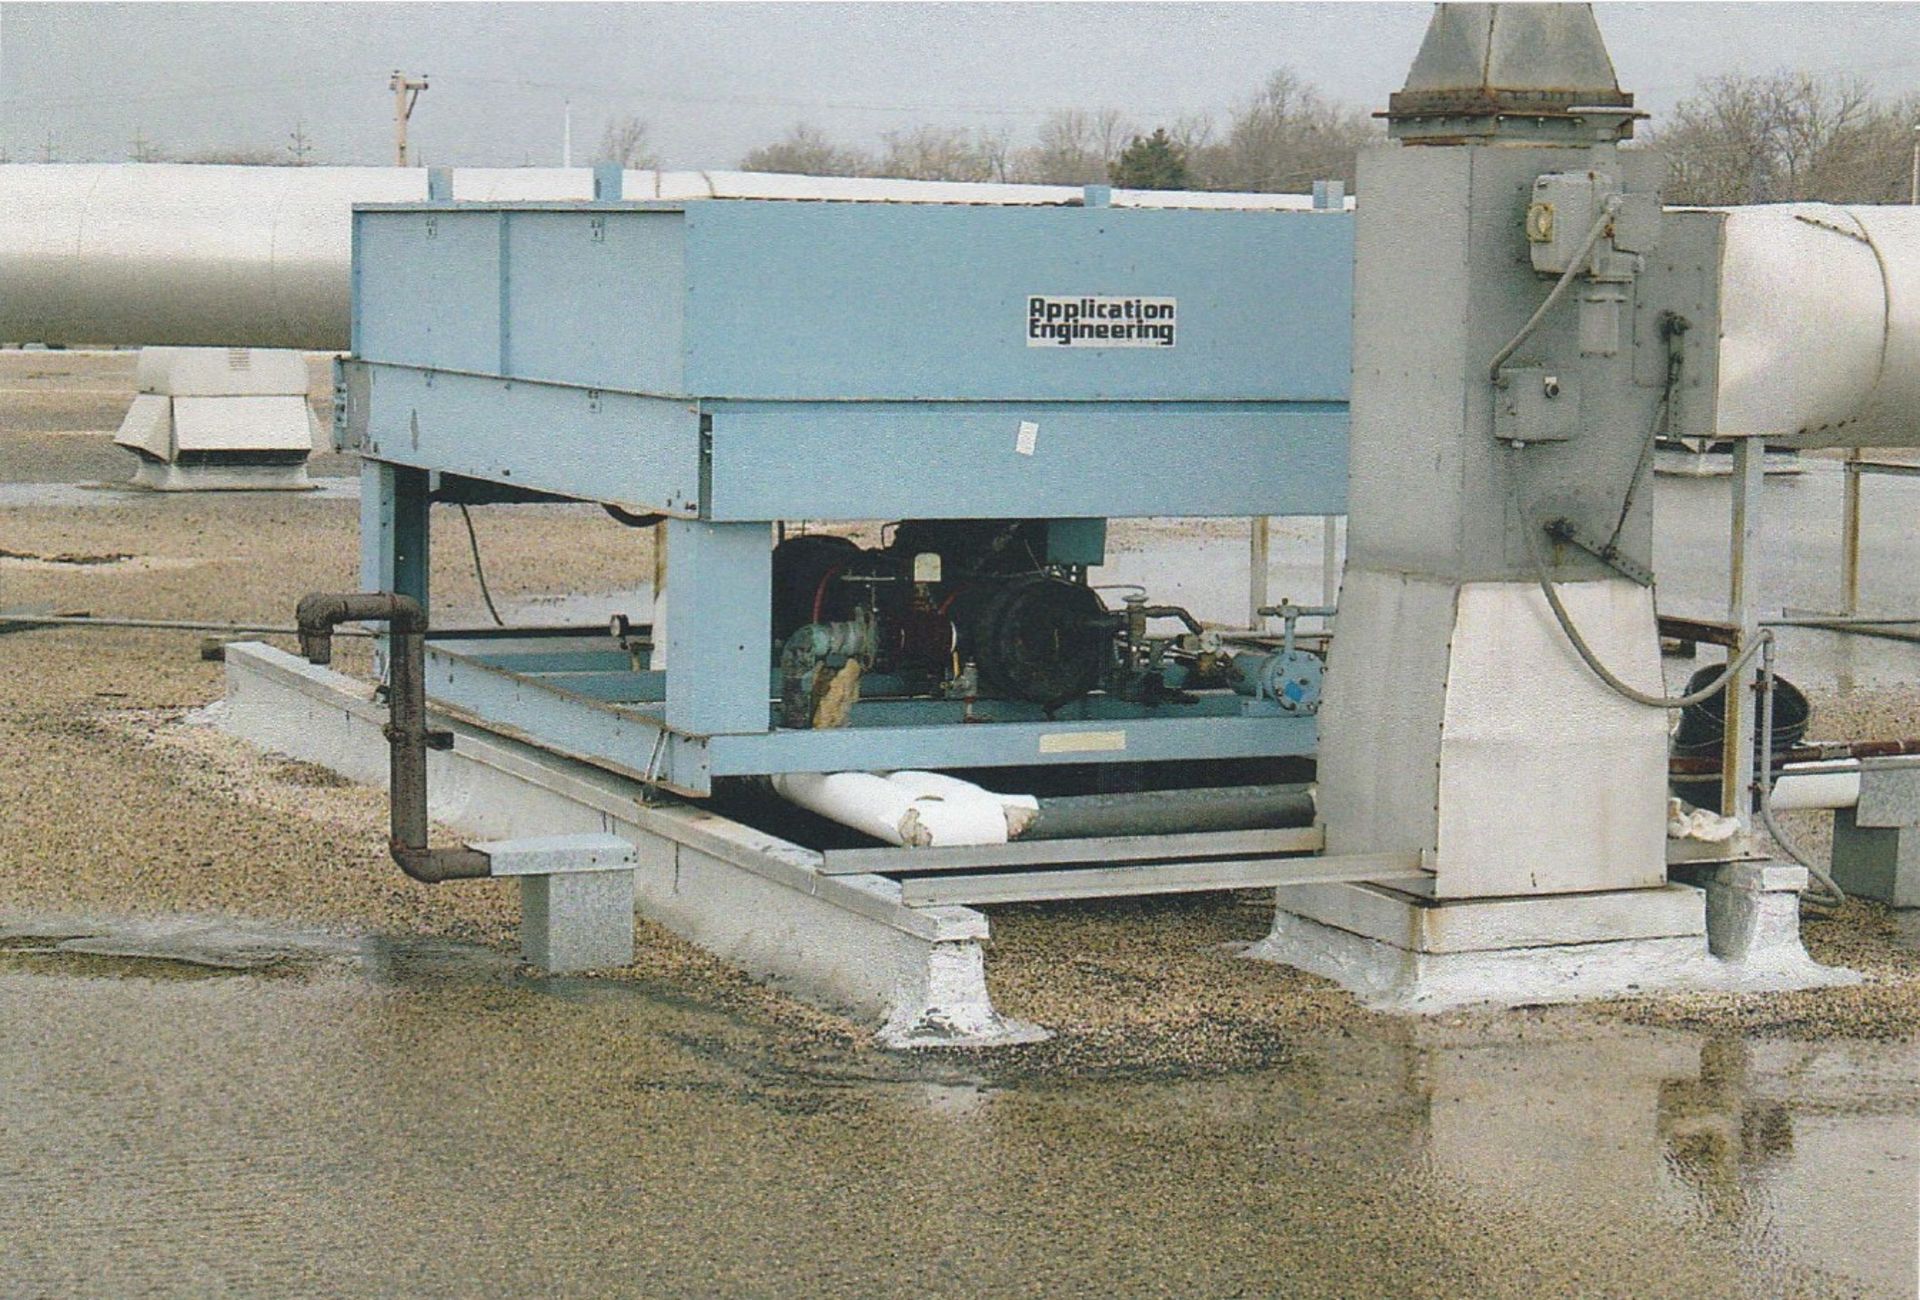 Application Engineering Roof Mounted Chiller. (Chiller was used on lot 1) WINNING BIDDER IS